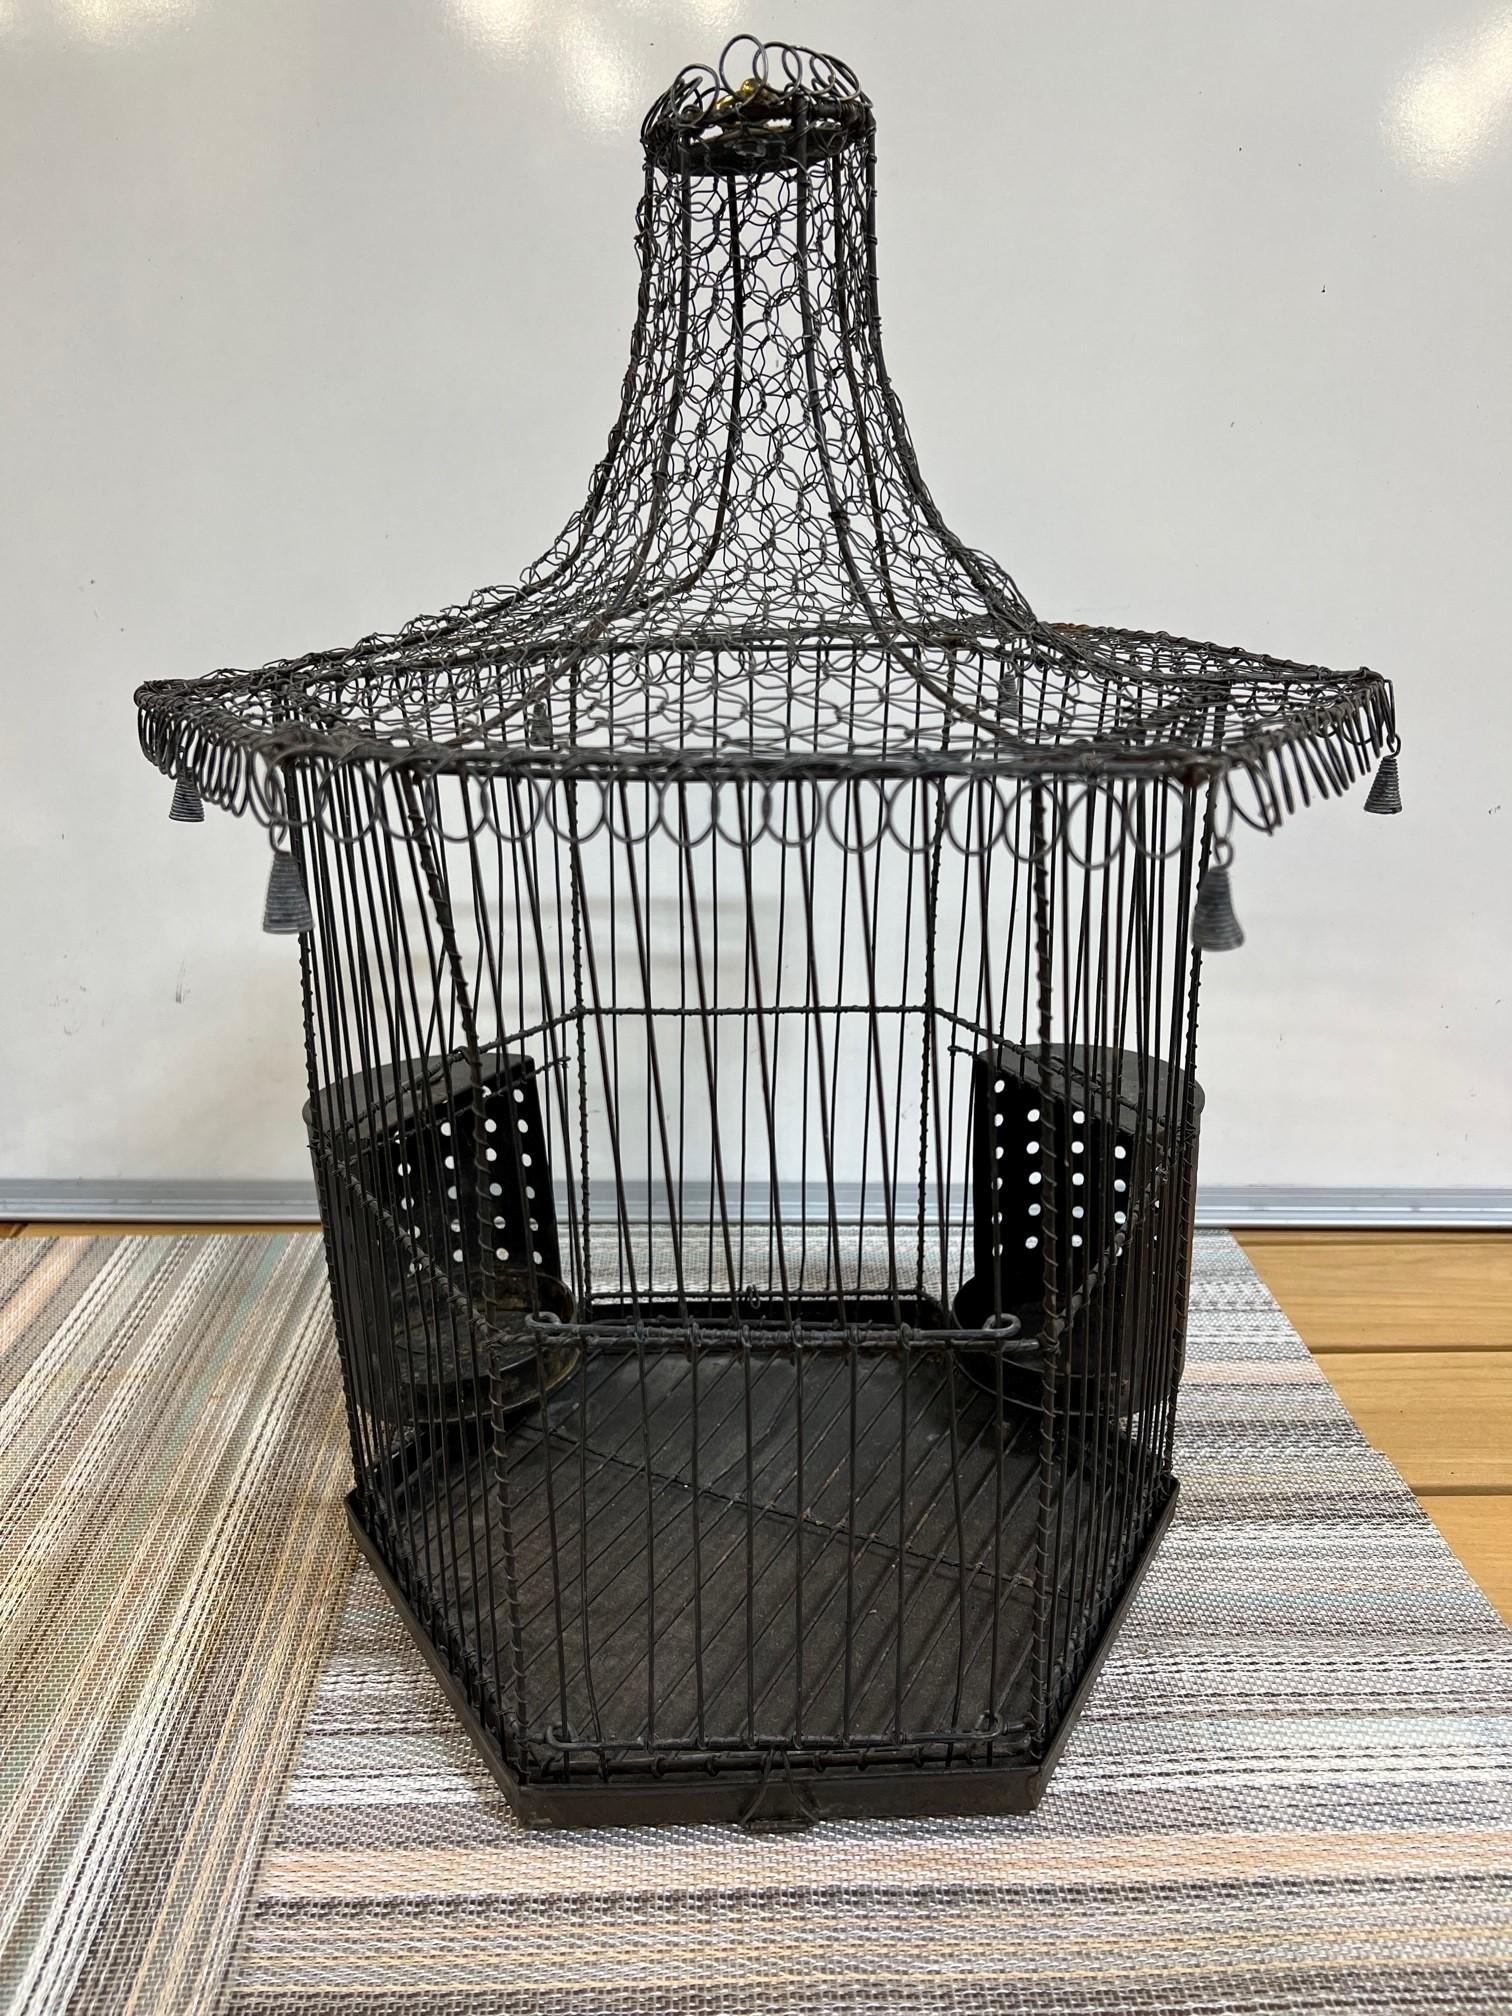 This is a nice mid-century iron and wire birdcage with hanging tassels and external protrusions for food and water. There is a door which slides up for access to the interior and two clips which hold the bottom tray. The birdcage is in good